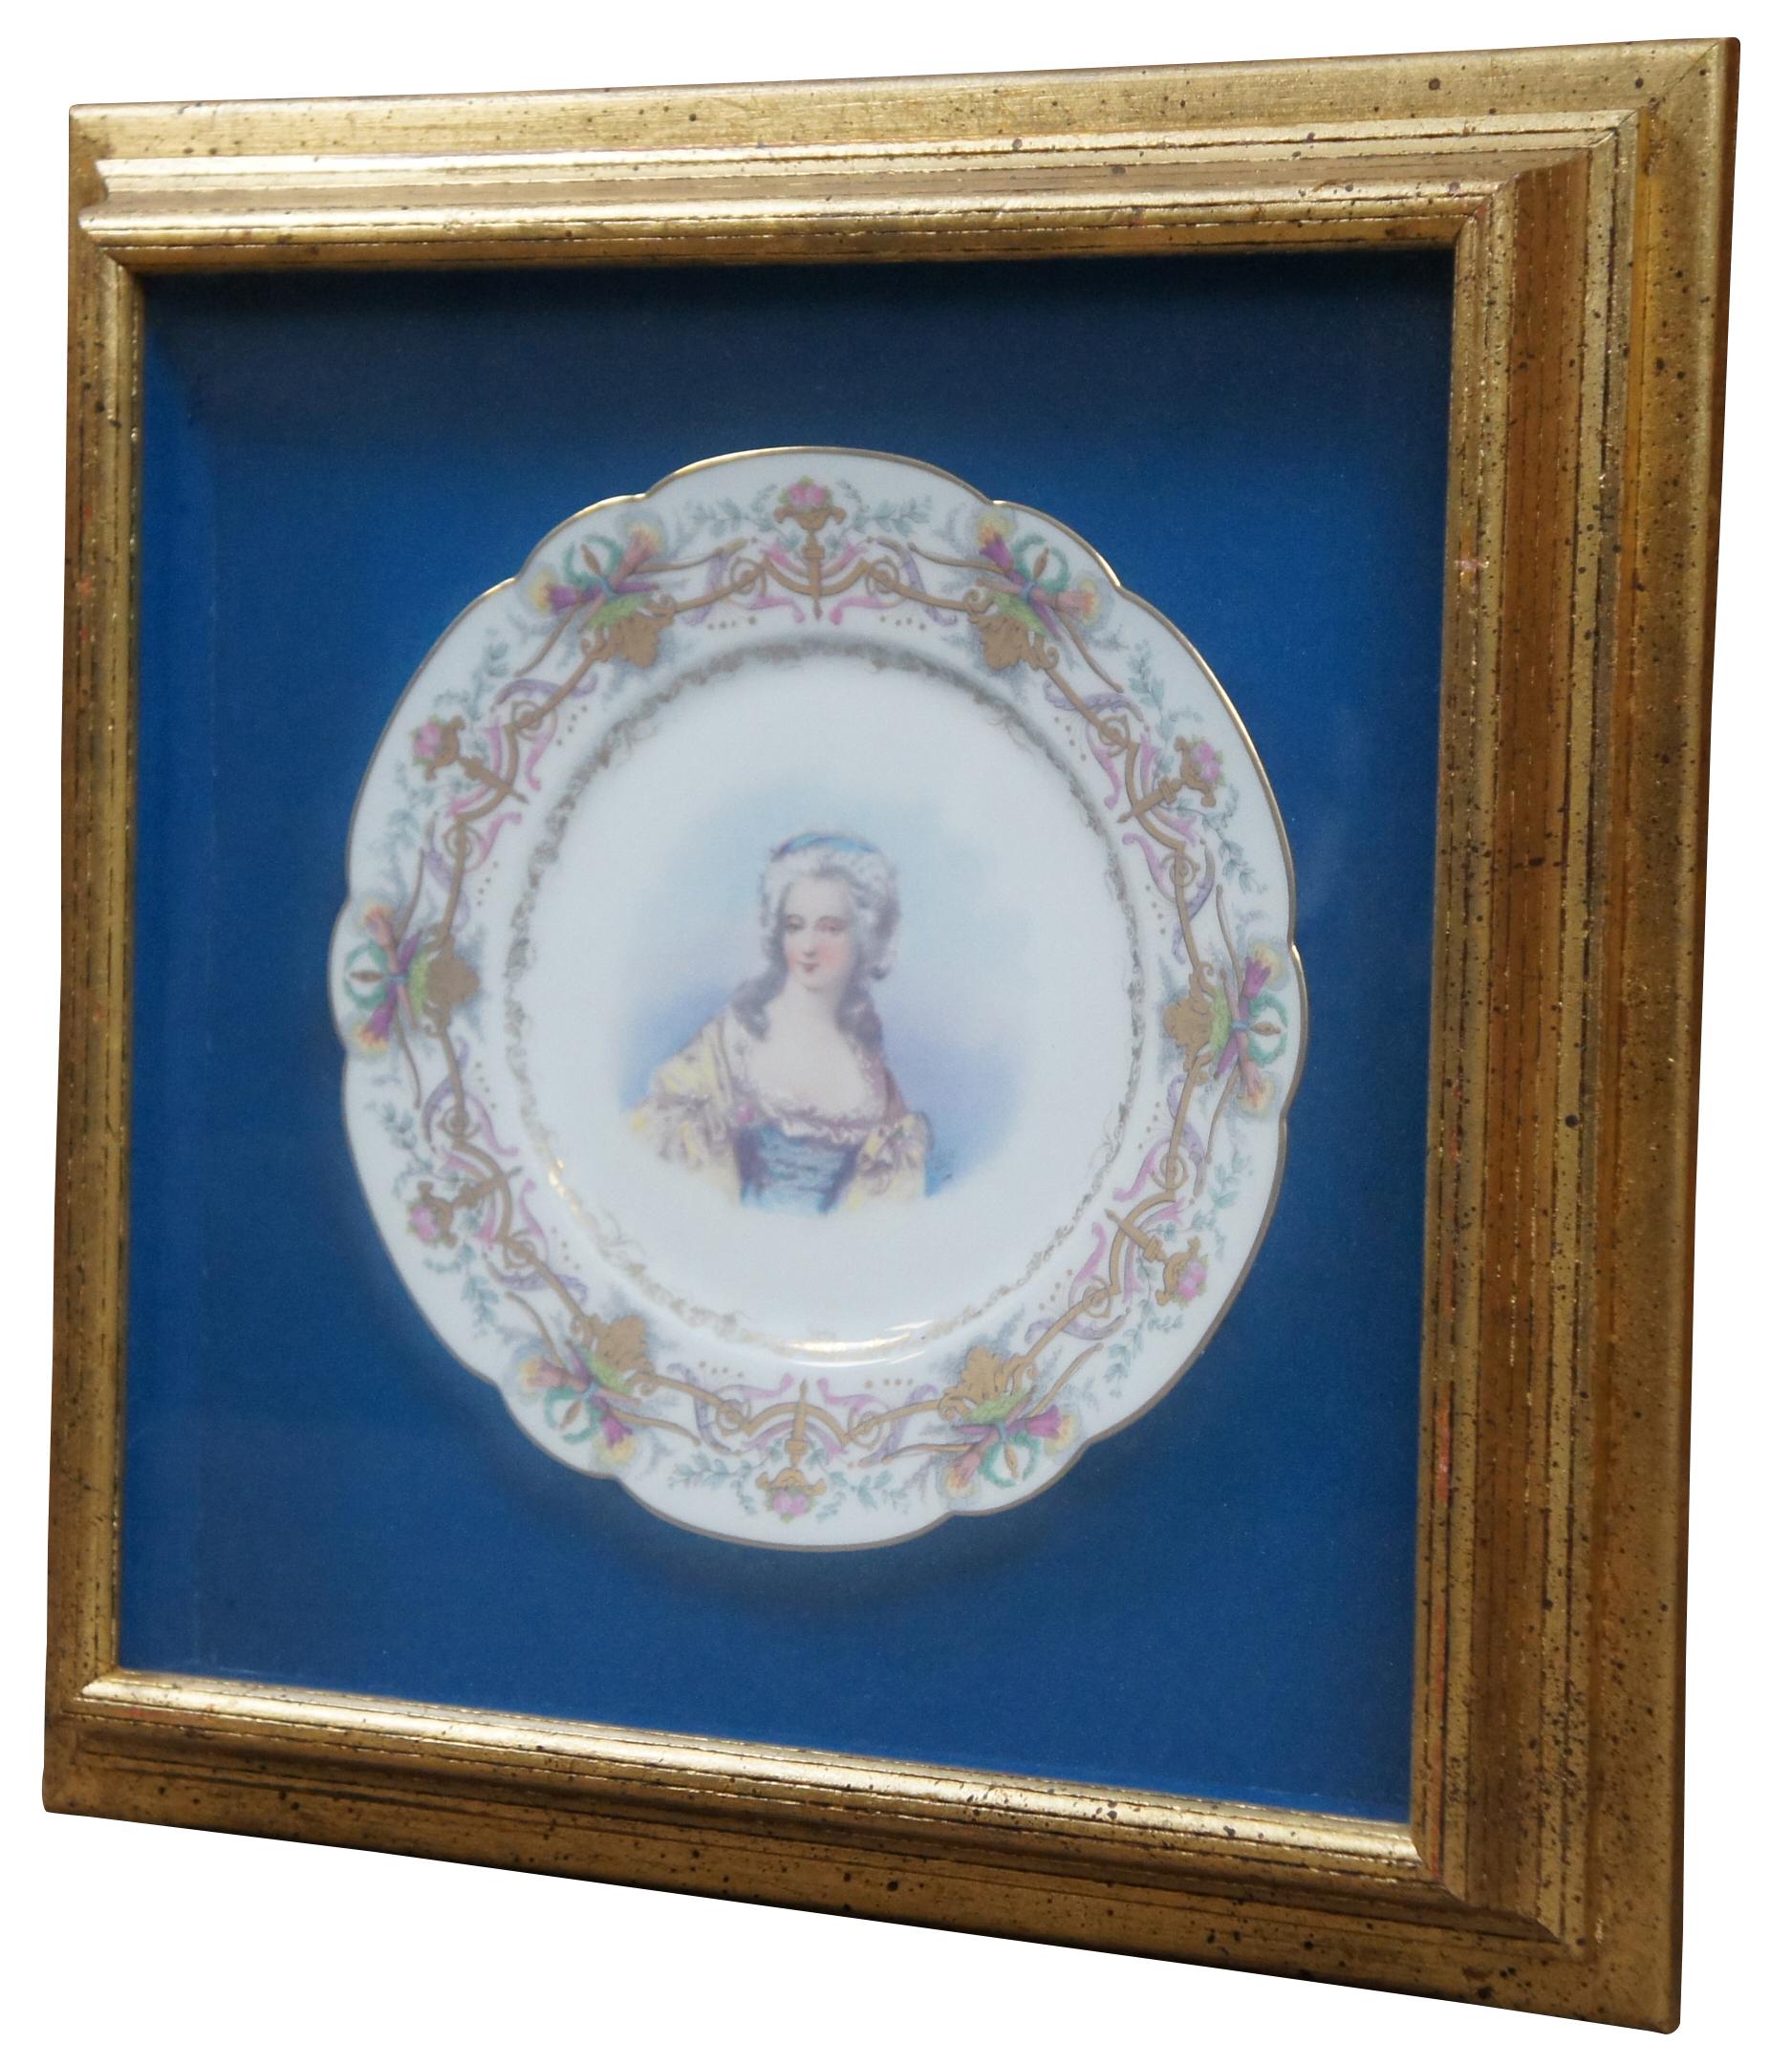 Framed antique 19th century sevres porcelain plate by Chateau des Tuileries featuring a portrait of a noblewoman framed by pink and gold torches and flowers.

Measures: 15.75” x 2.25” x 15.75” / Plate diameter – 9” (width x depth x height).